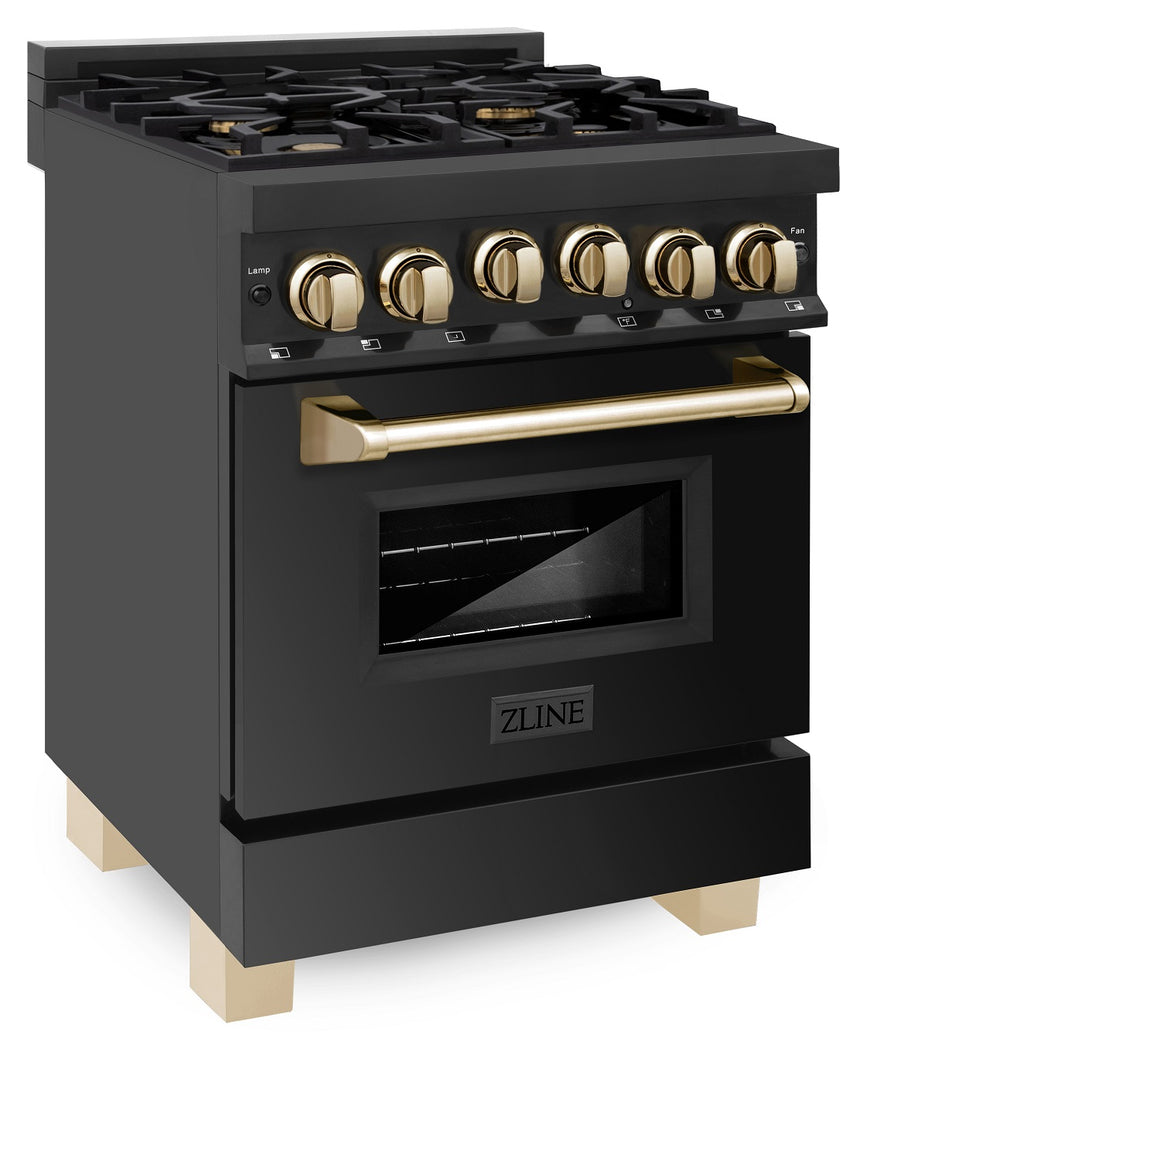 ZLINE Autograph Edition 24" 2.8 cu. ft. Range with Gas Stove and Gas Oven in Black Stainless Steel with Gold Accents (RGBZ-24-G)